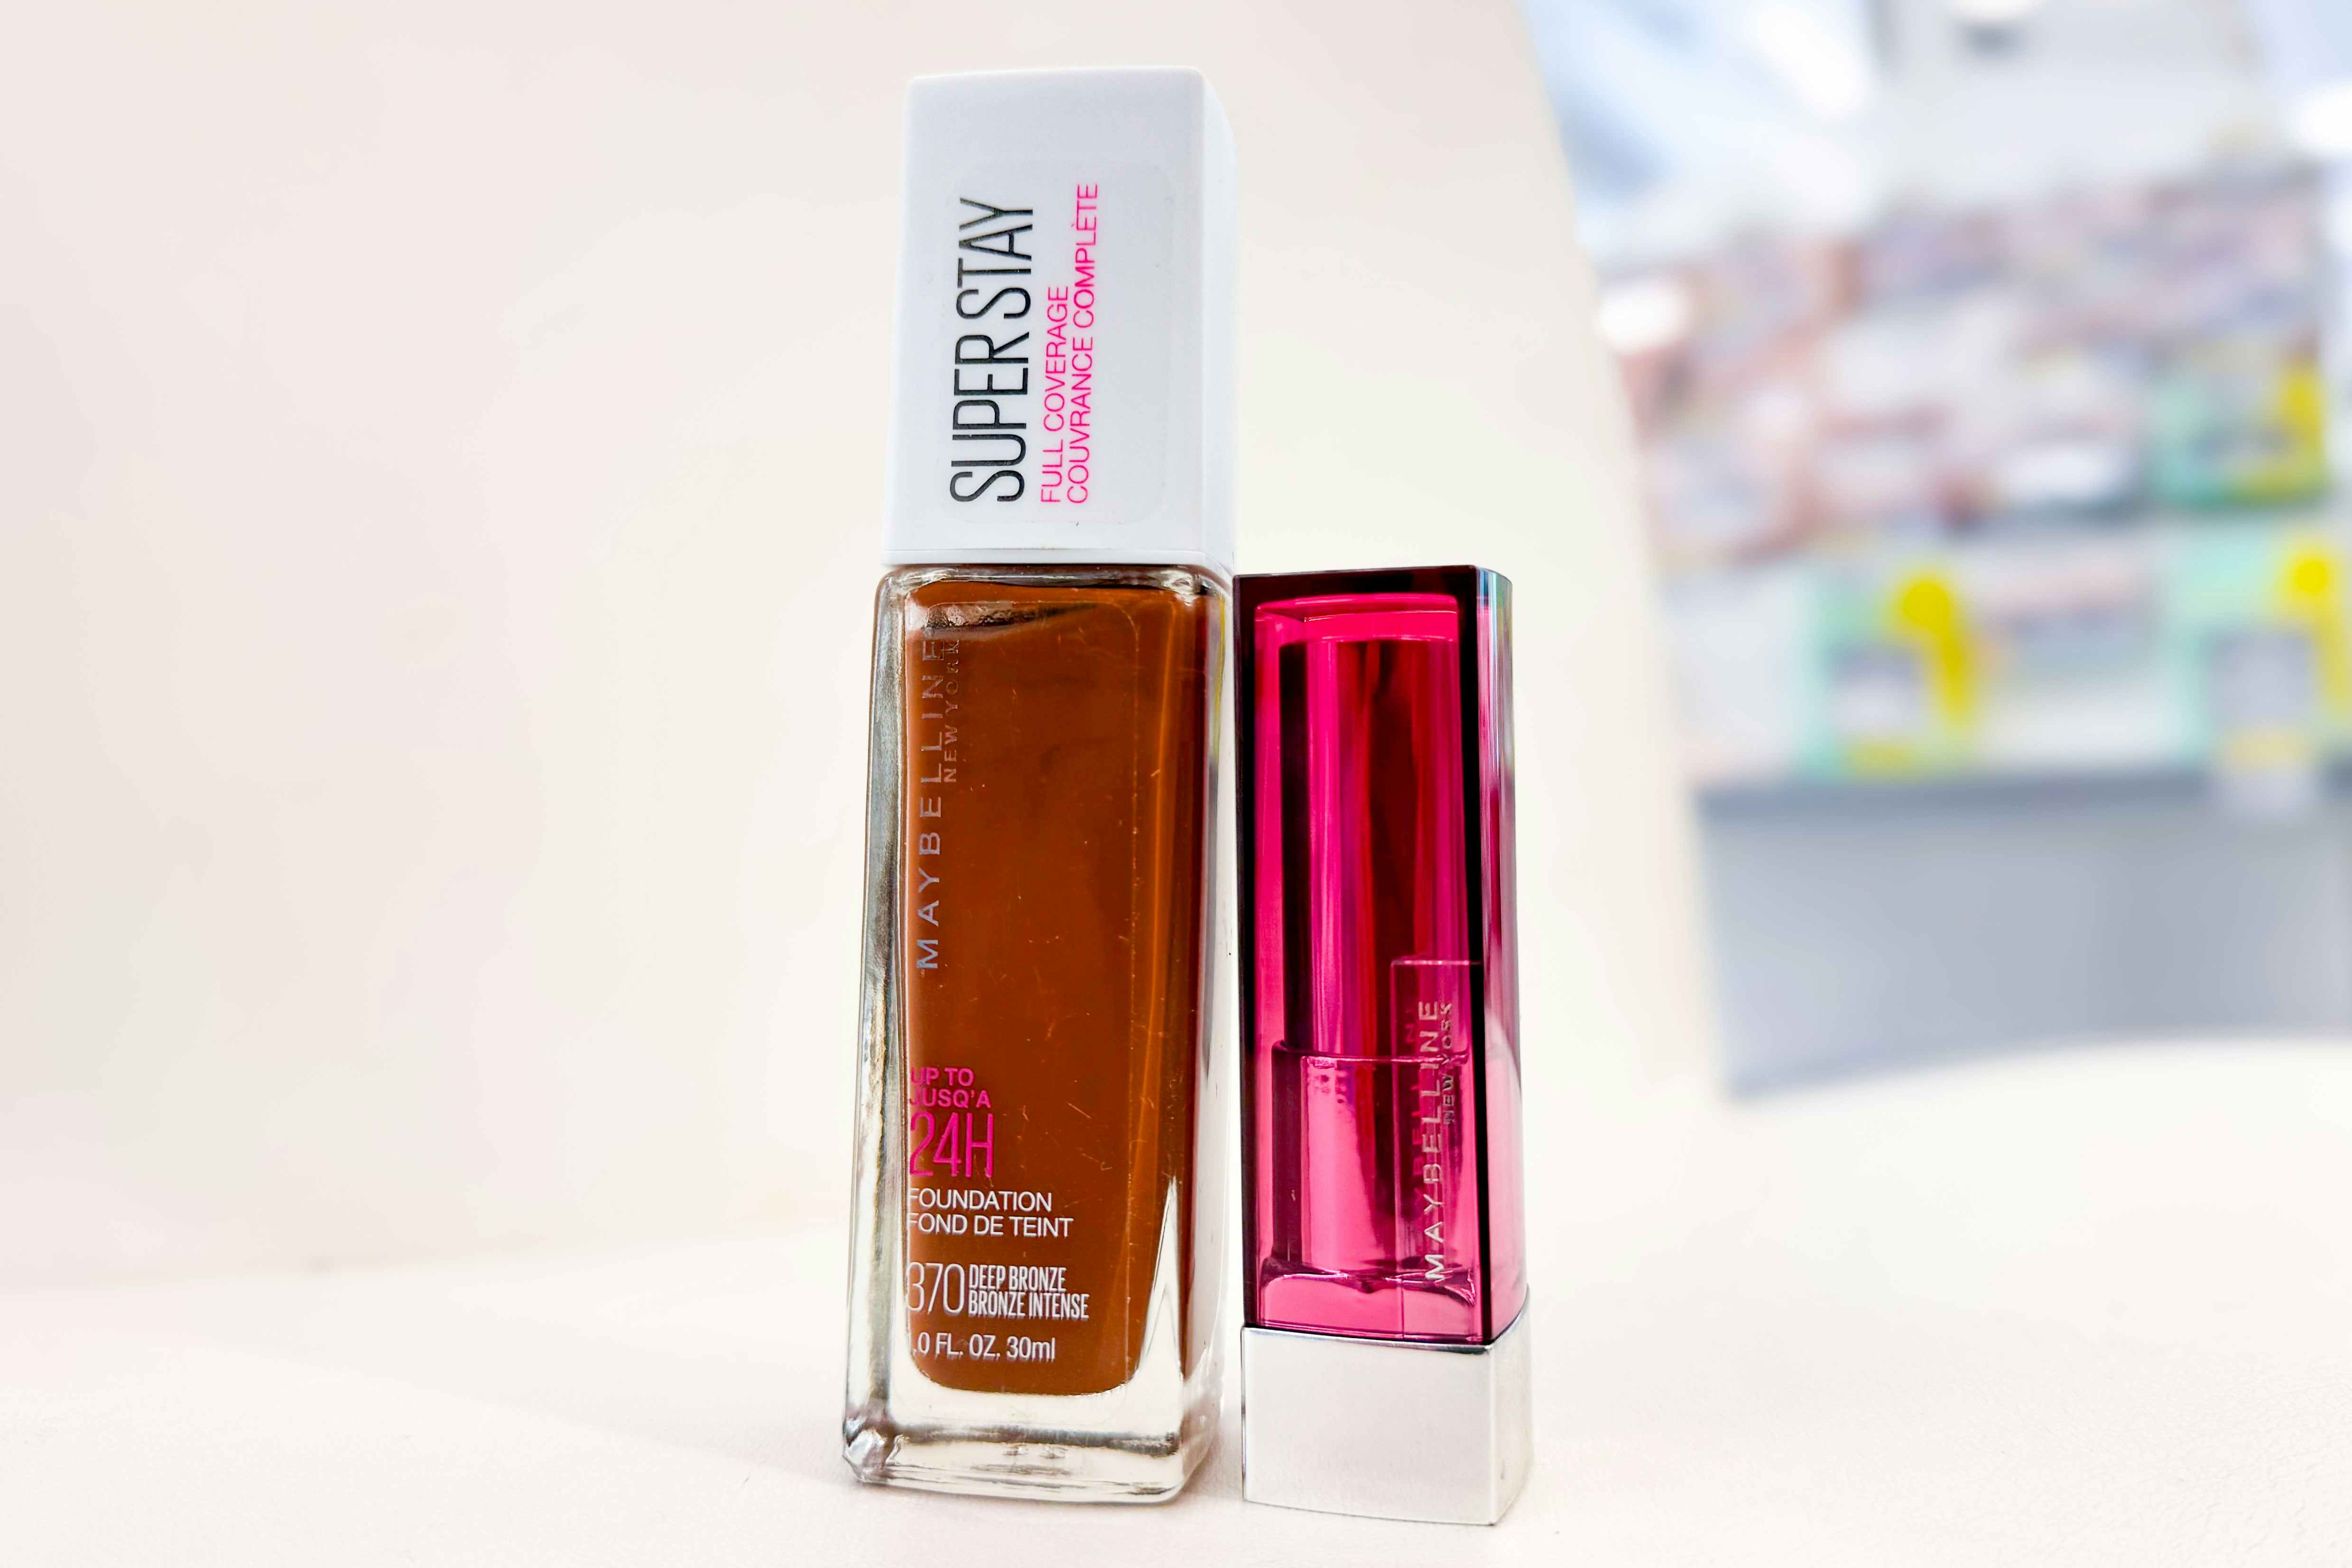 $0.57 Maybelline Products: Get Foundation, Mascara, and Lipstick at Walgreens